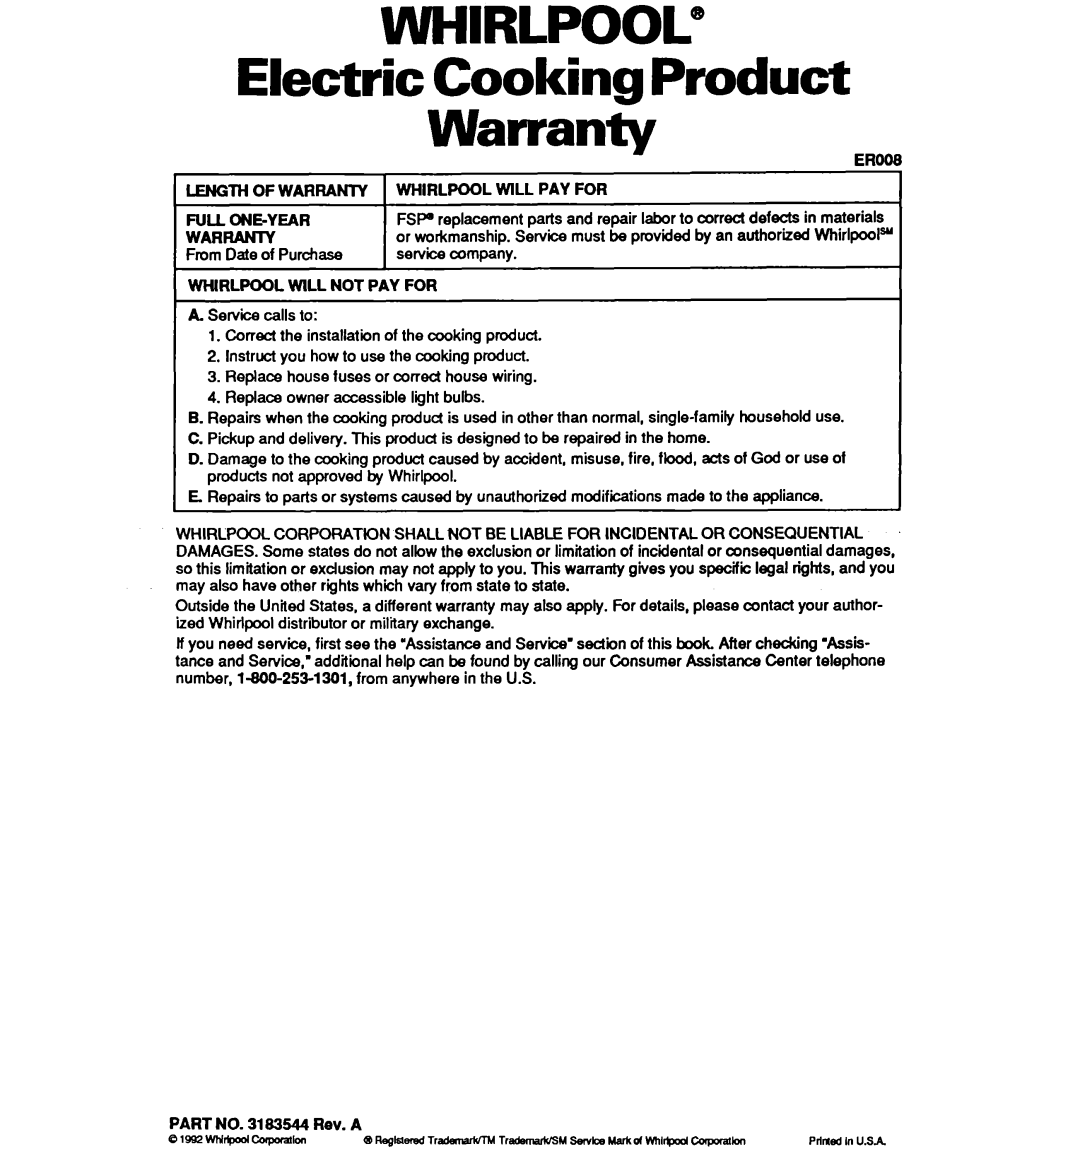 Whirlpool RB1005XY, RB120PXY, RBl OOPXY, RB220PXY warranty WHIRLPOOL@ Electric Cooking Product Warrantv 